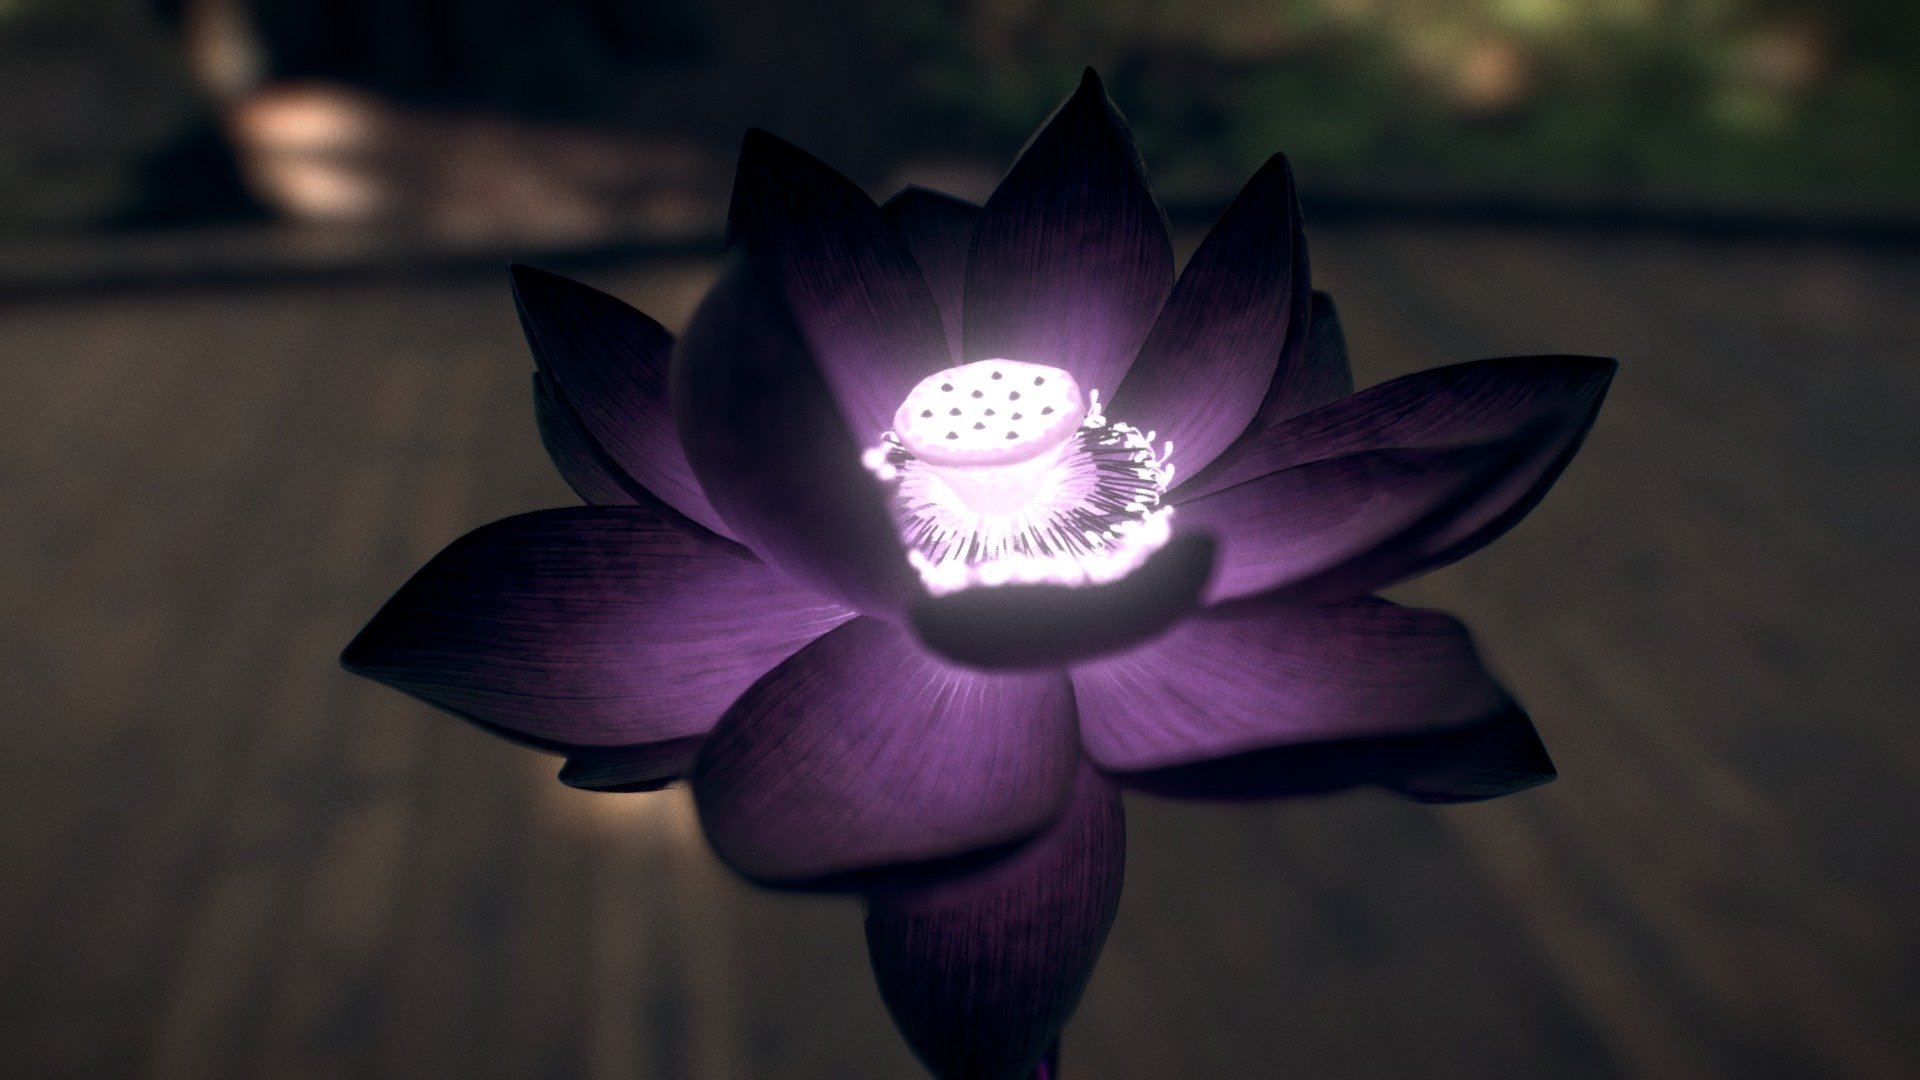 A recolor/reskin of the other lotus flower I made. What can I say, I love Magic lol. I can't just make a lotus flower and NOT make a Black Lotus version ;P

Maya &amp; Substance Painter - Black Lotus - 3D model by Frank Moussette (@moussetticus) 3d model